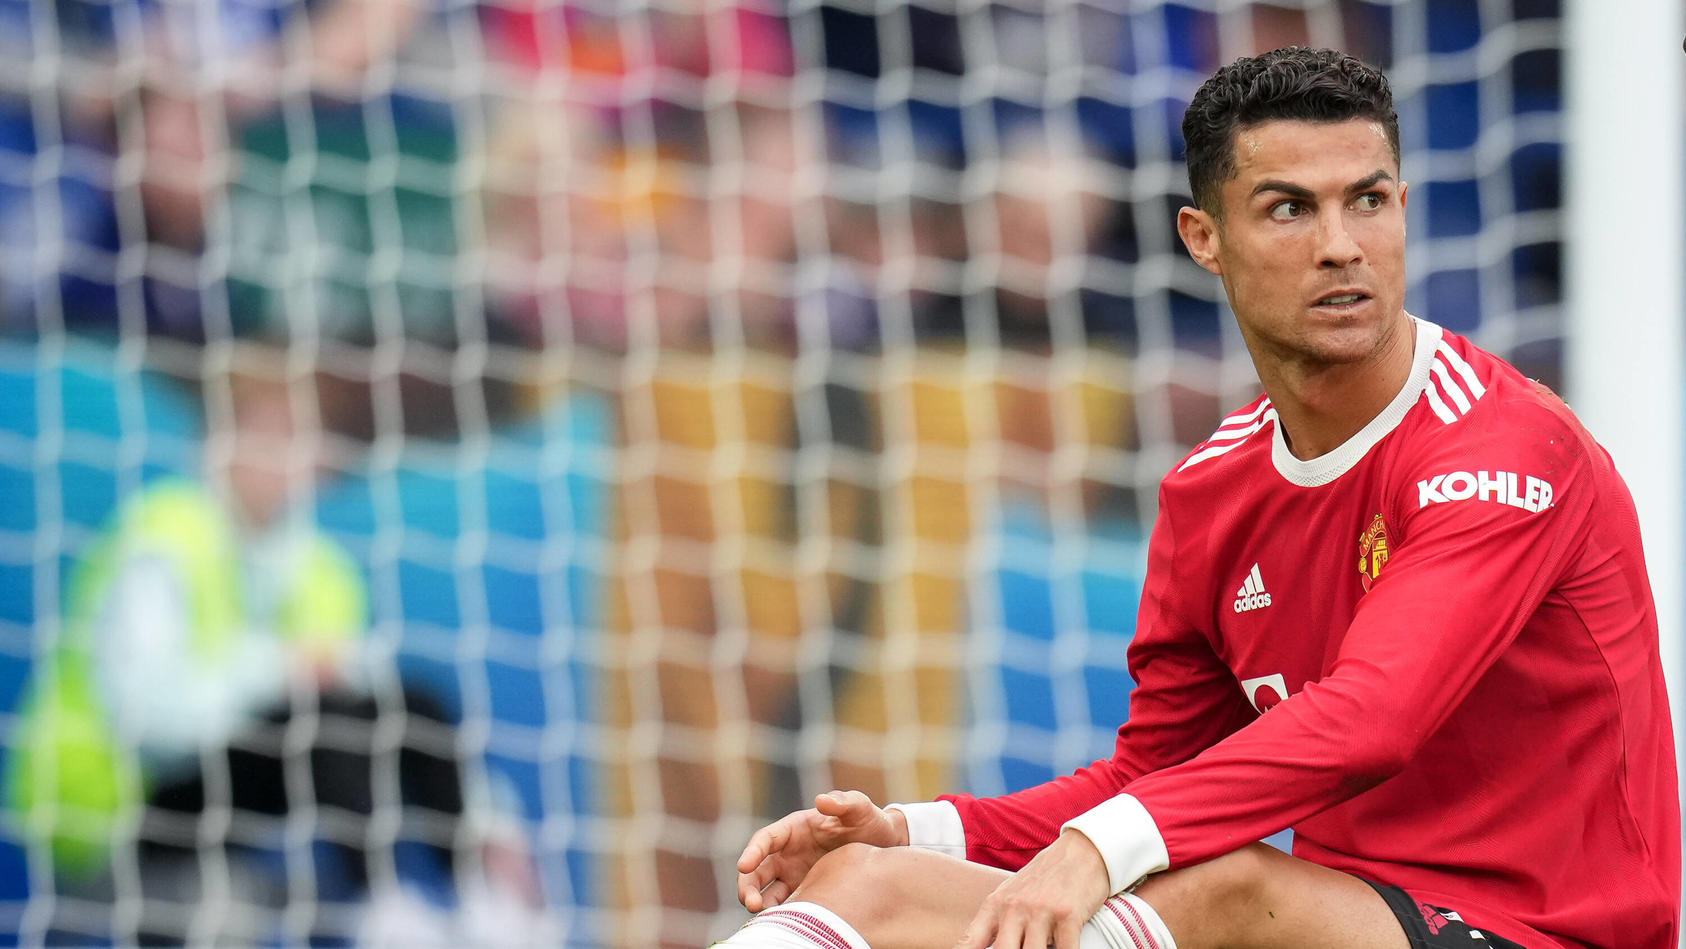  Sport Bilder des Tages Cristiano Ronaldo of Man Utd during the Premier League match between Leicester City and Manchester United, ManU at the King Power Stadium, Leicester, England on 16 October 2021. PUBLICATIONxNOTxINxUK Copyright: xAndyxRowlandx 